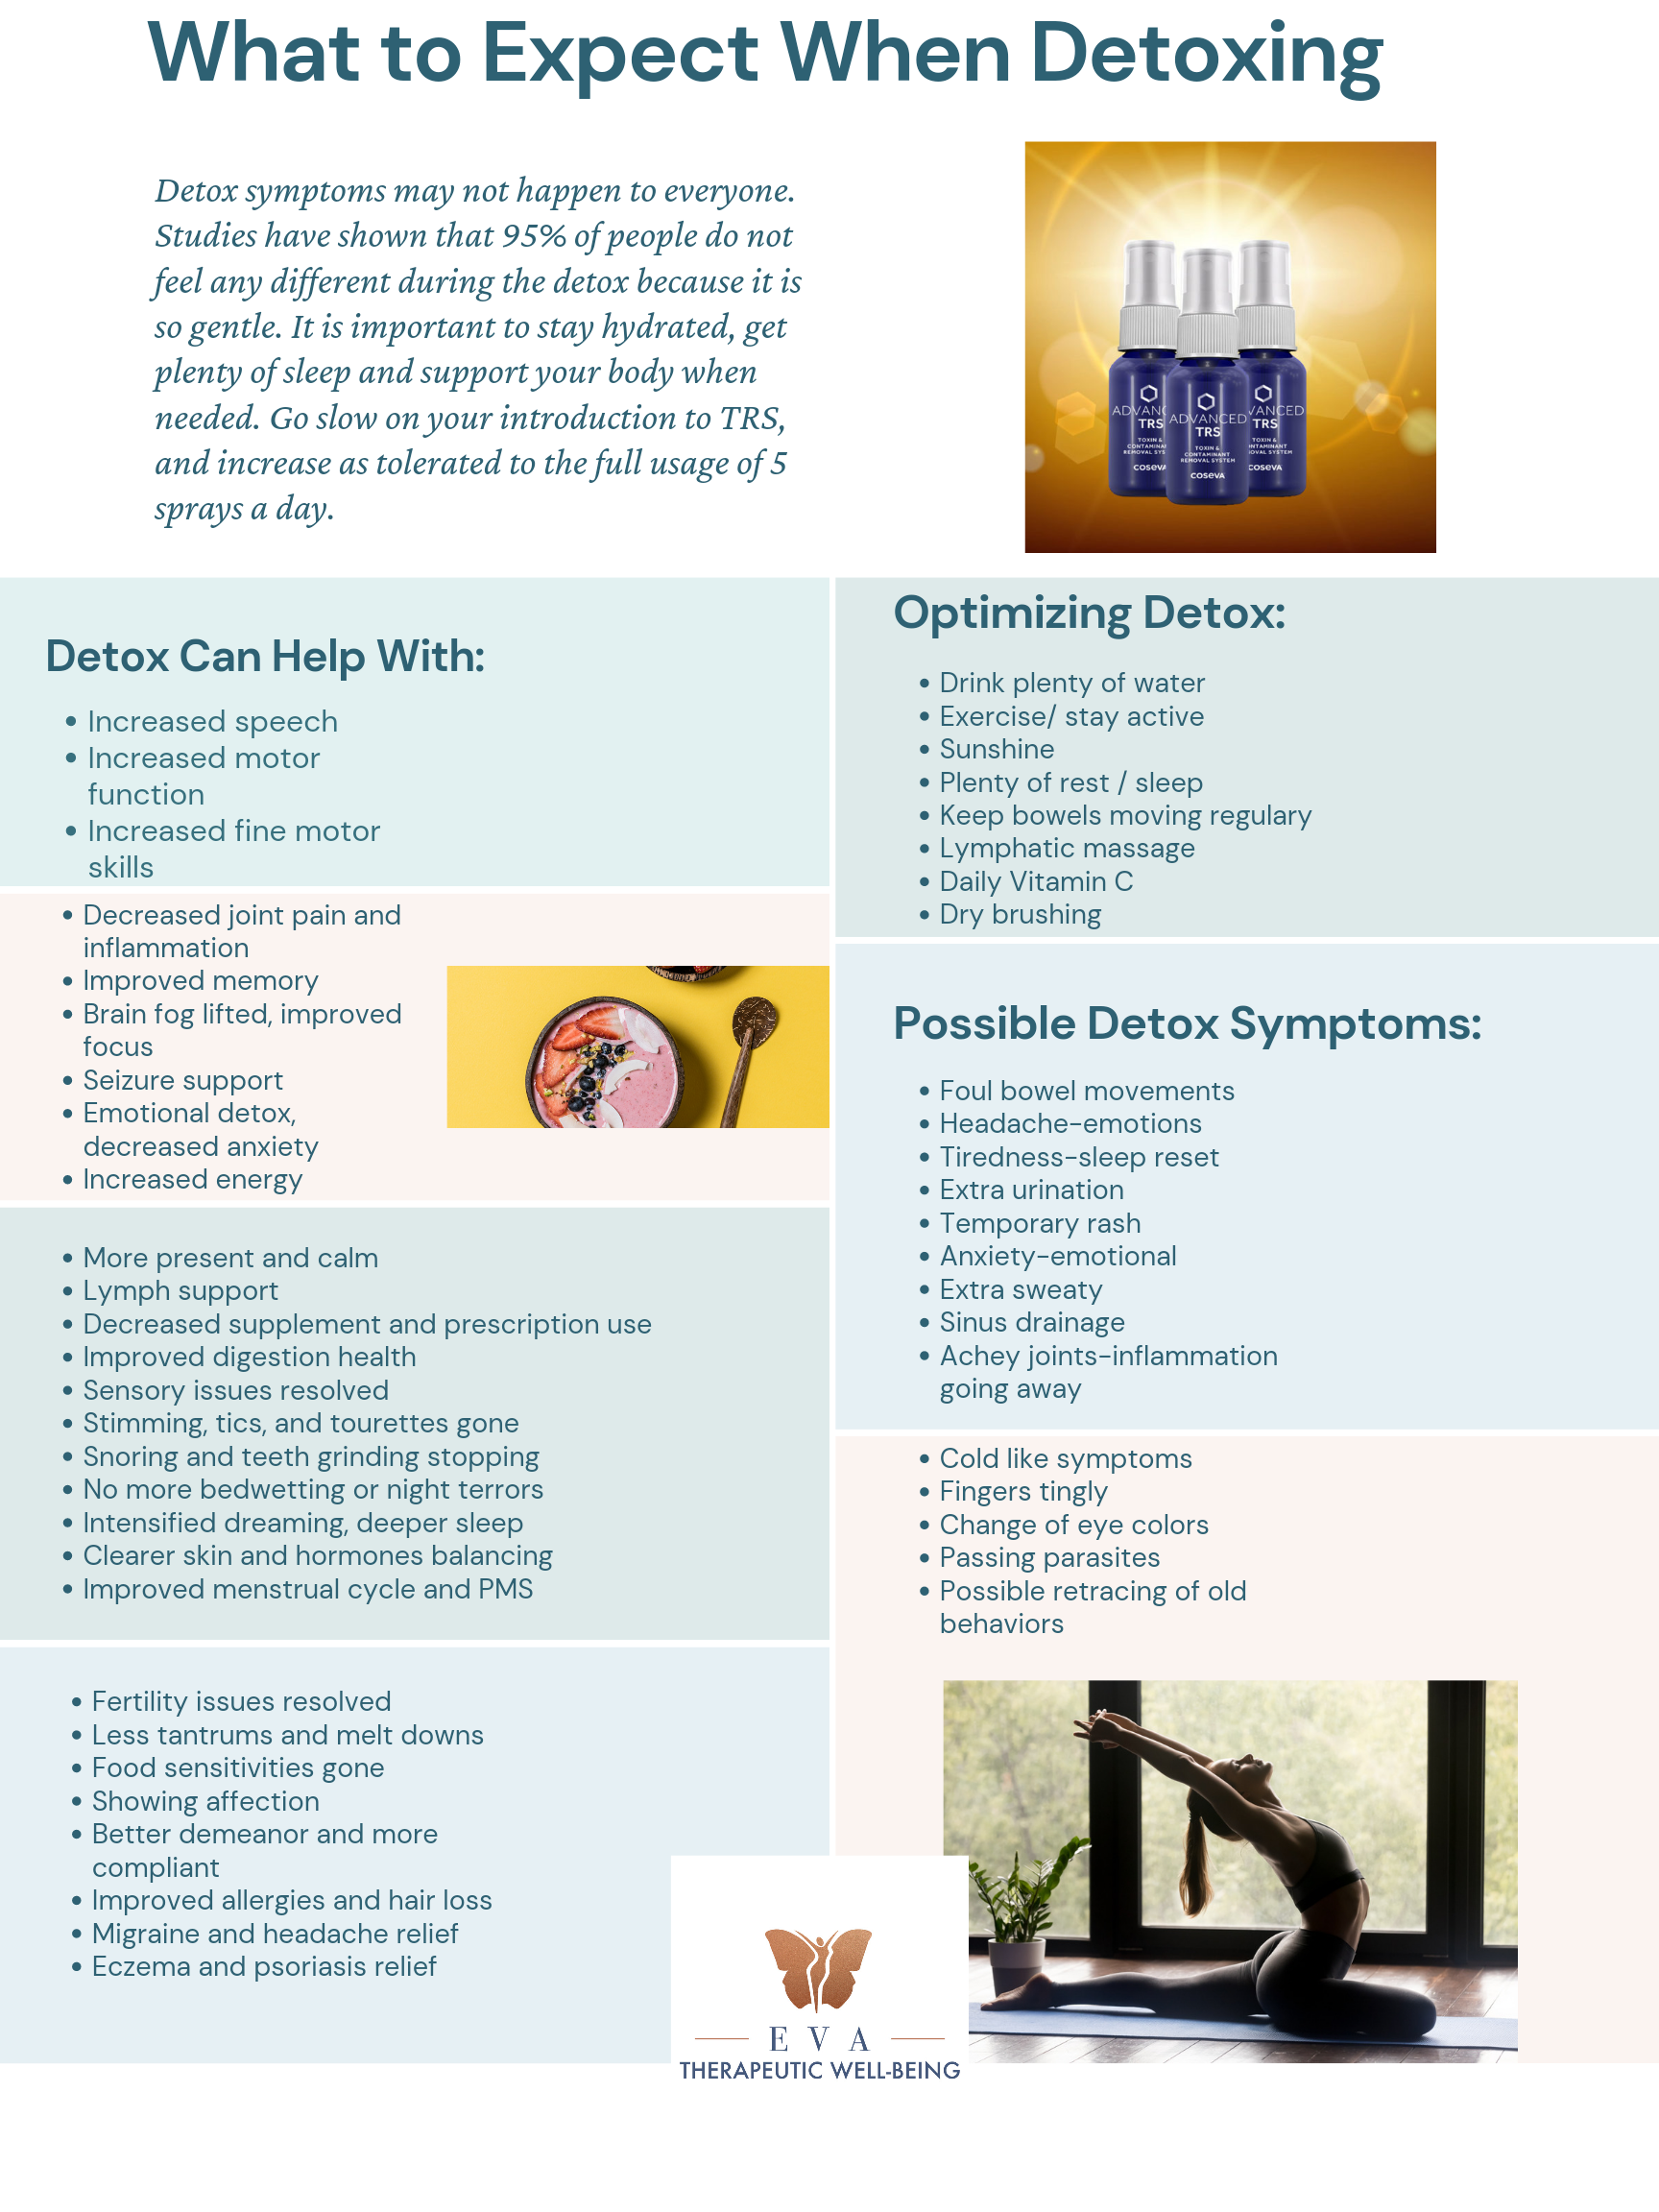 What To Expect When Detoxing informational poster